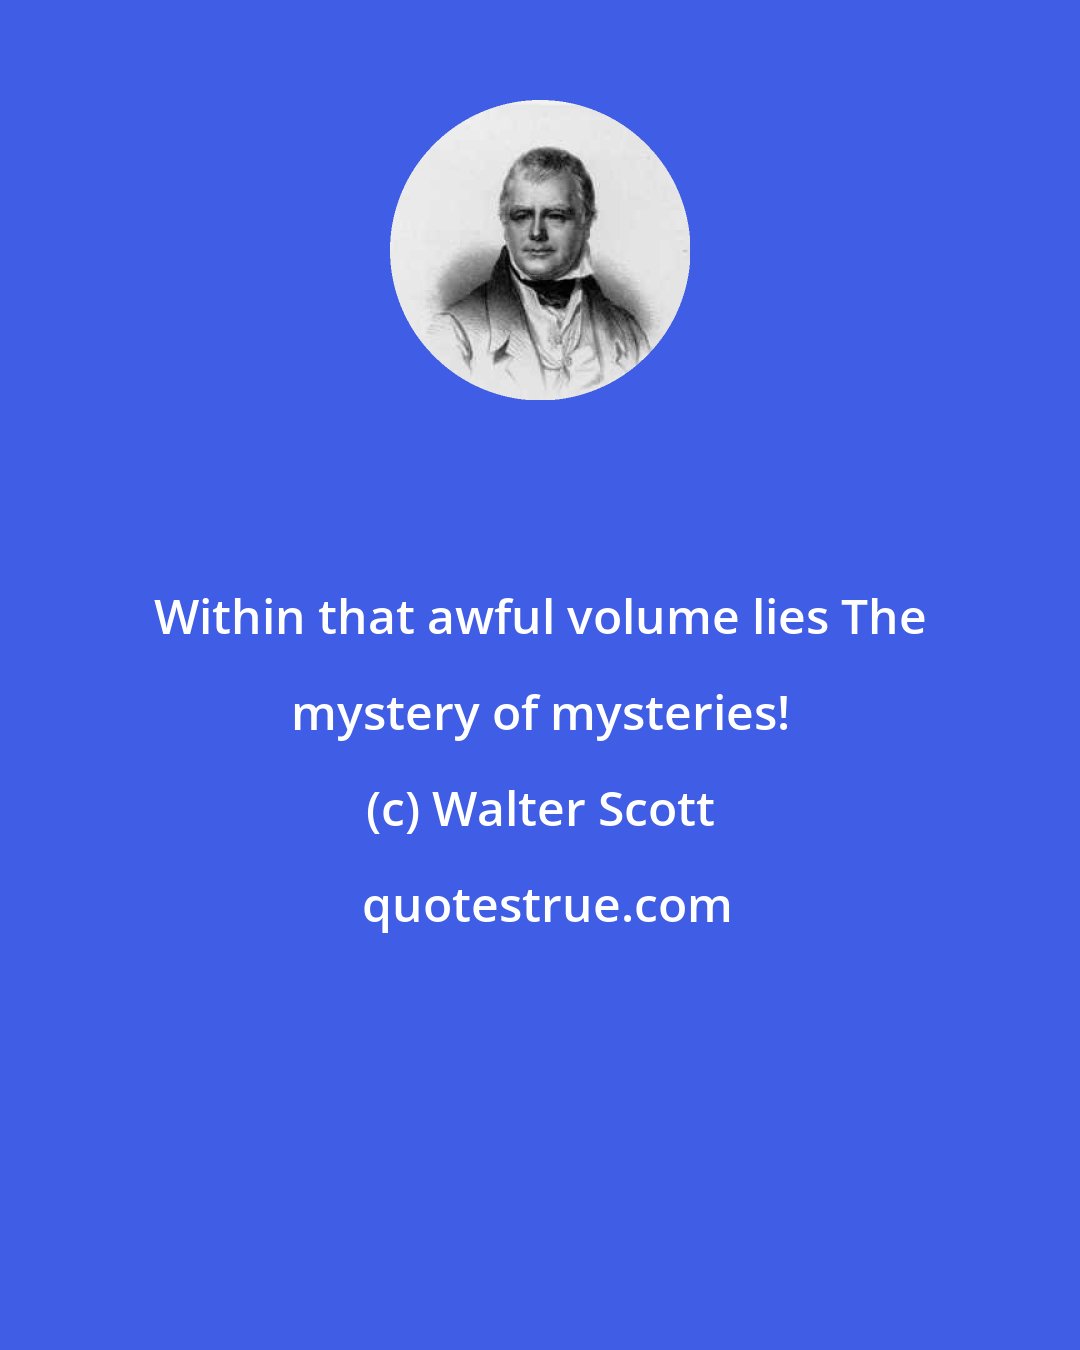 Walter Scott: Within that awful volume lies The mystery of mysteries!